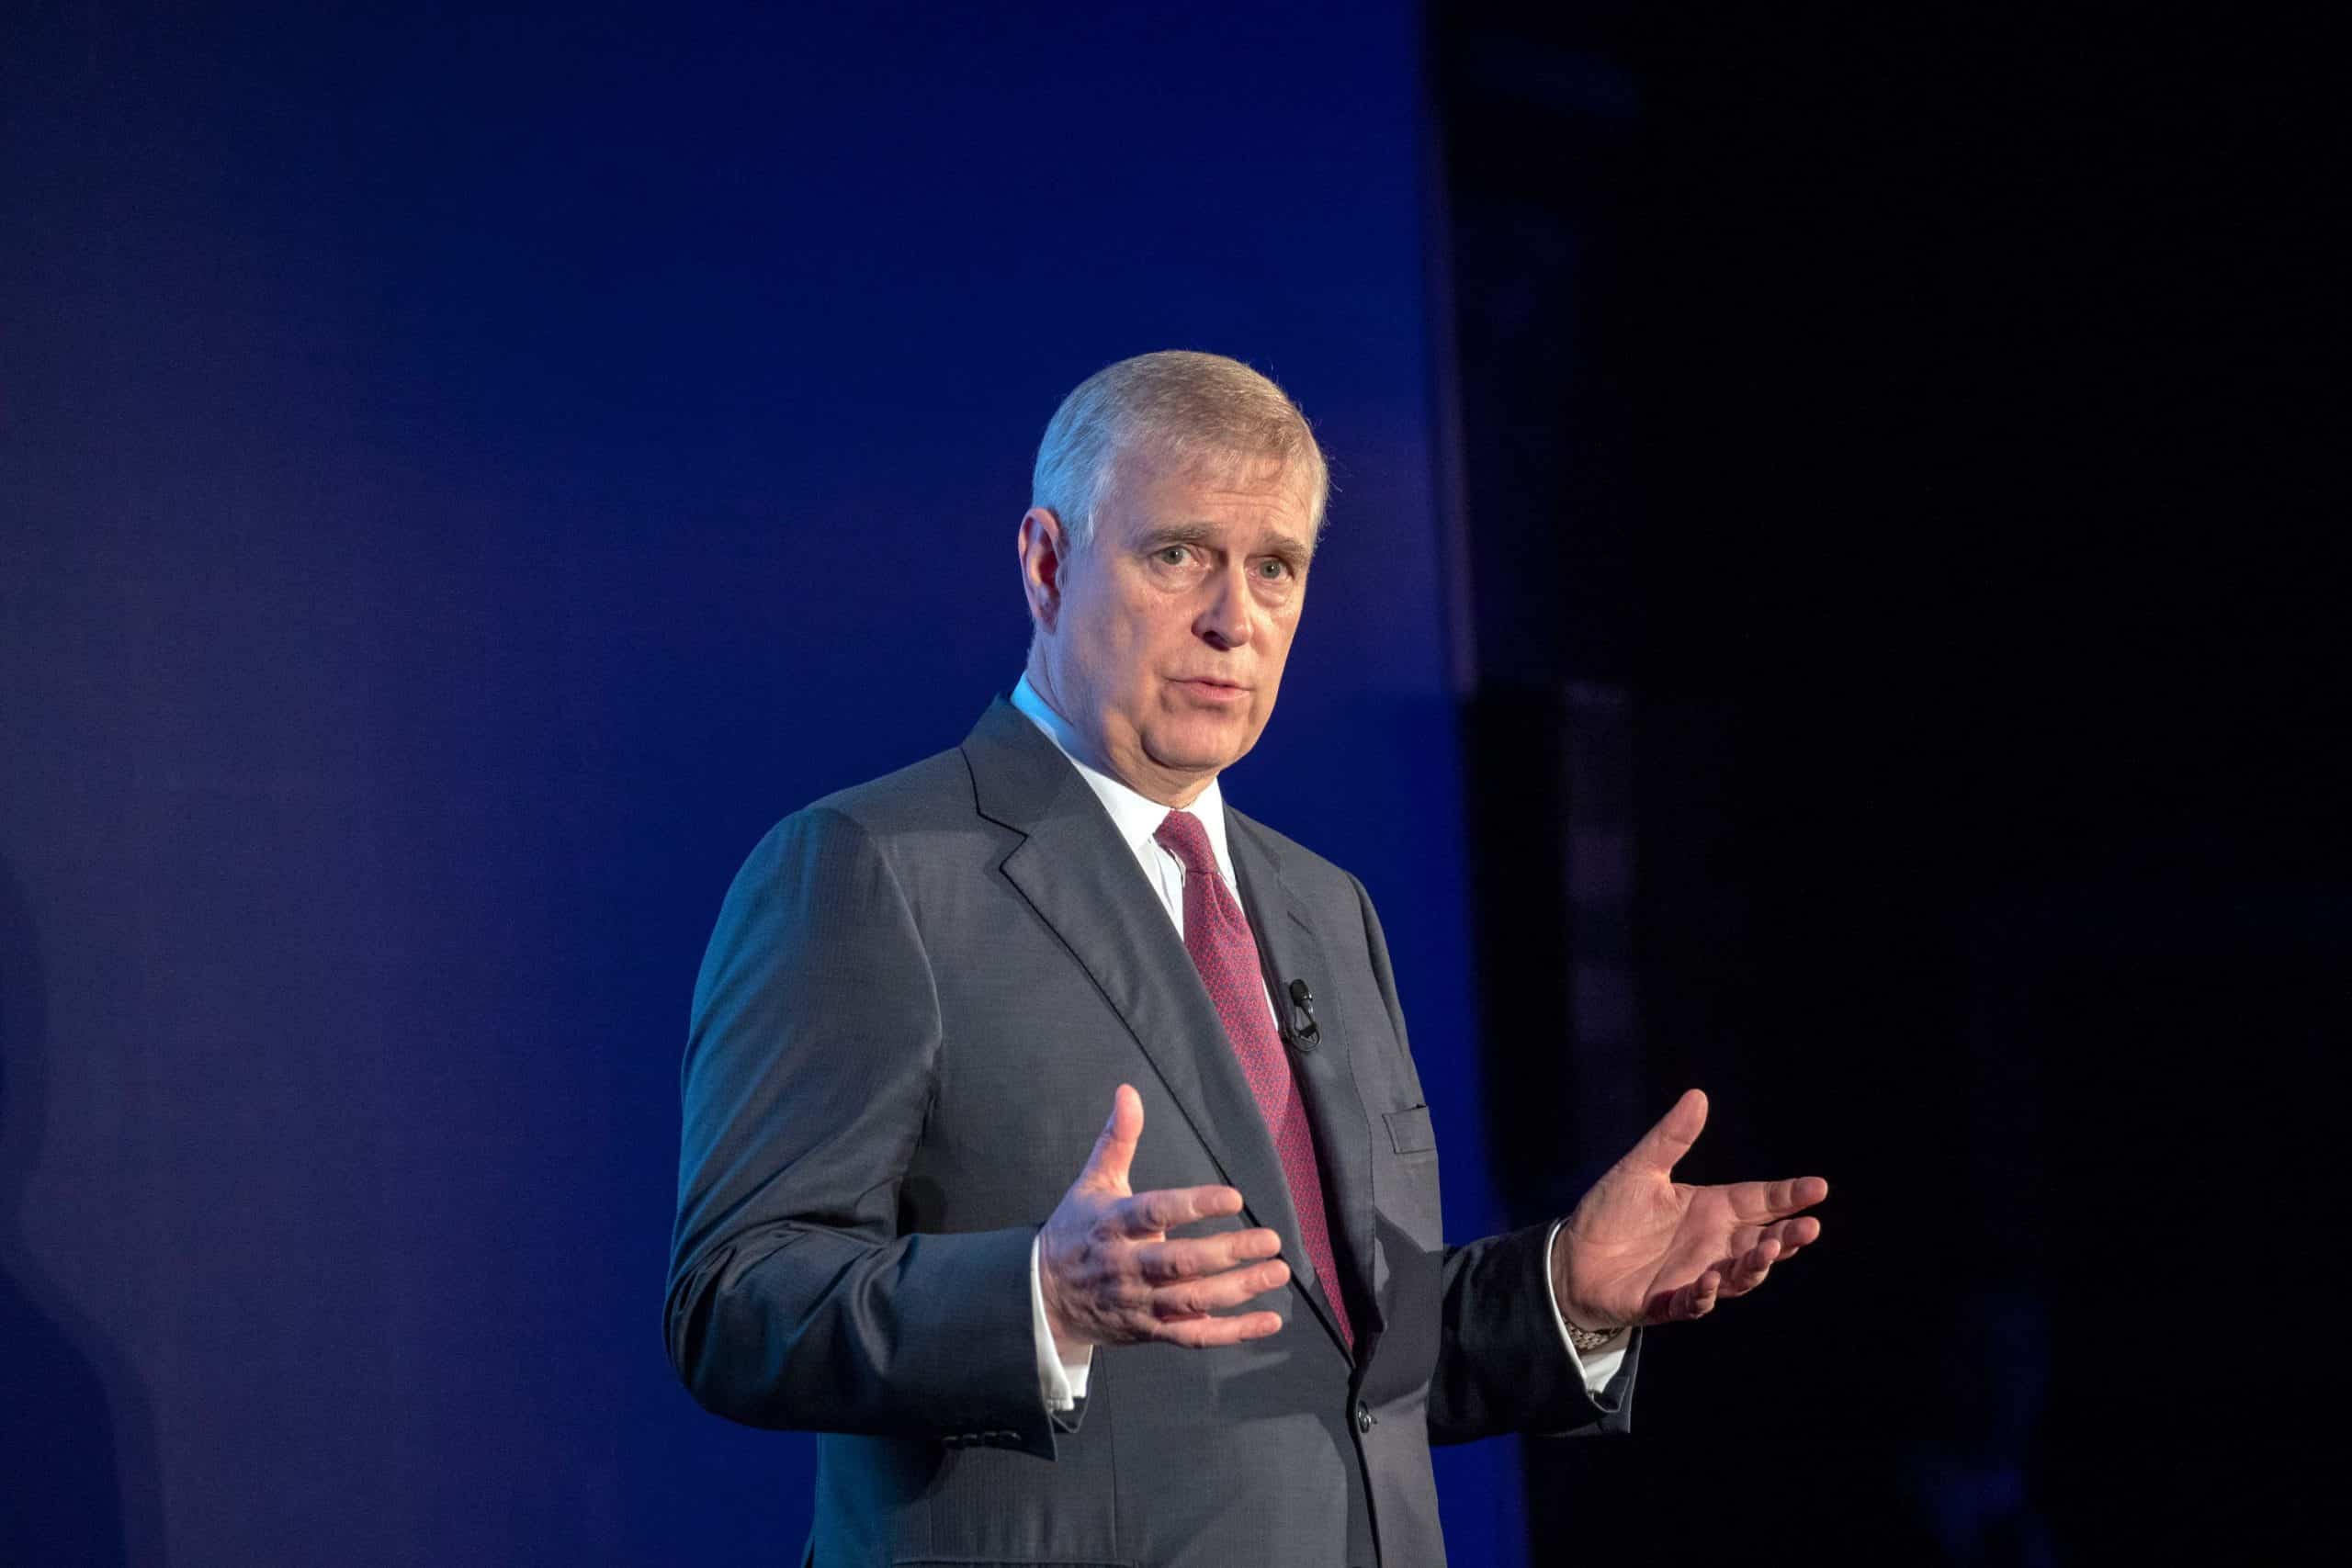 Telegraph slammed over ‘unhinged’ front cover of Prince Andrew’s alleged bath tub romp